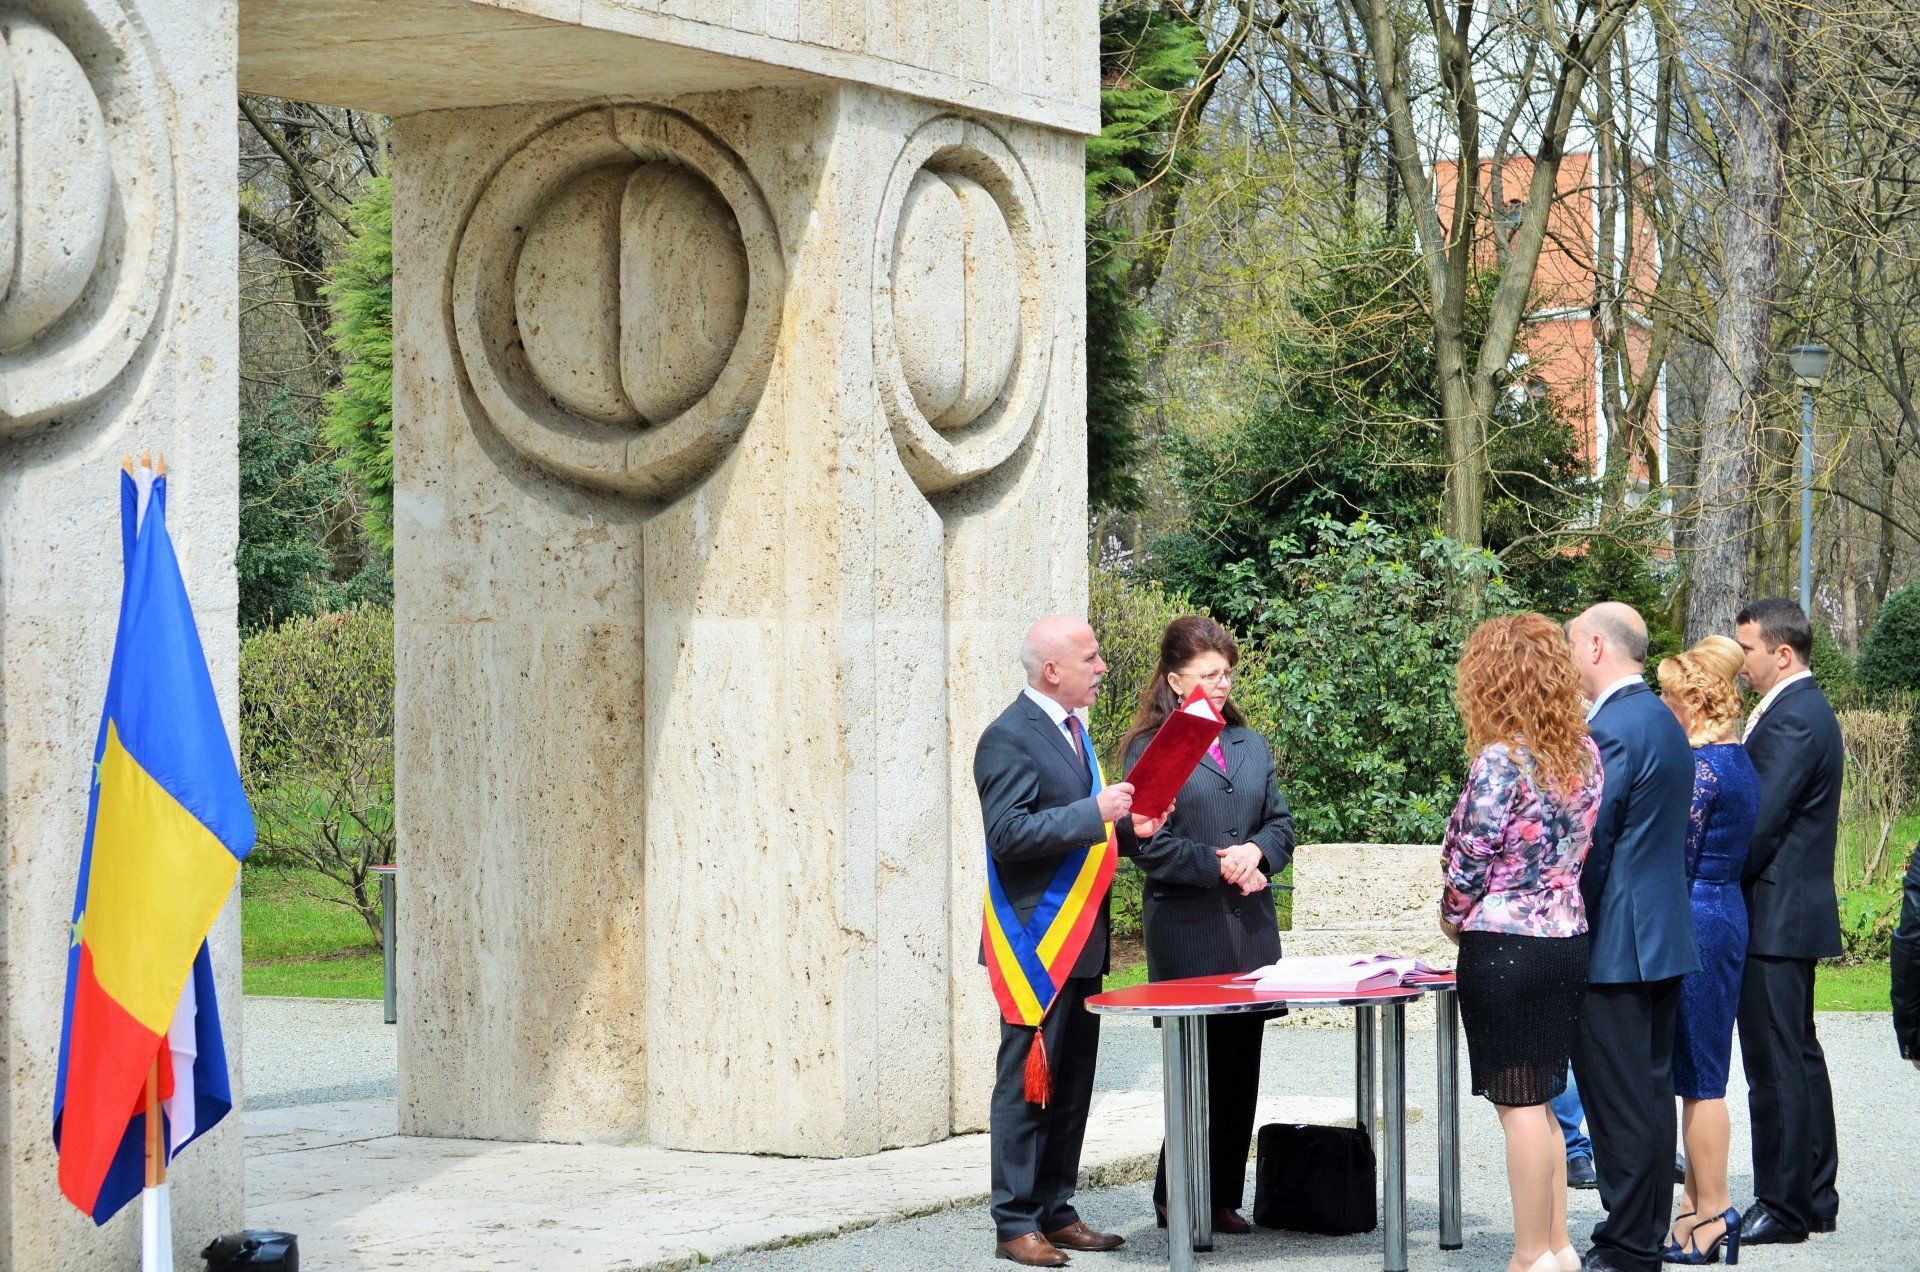 Largest monument to the kiss: The Gate Of The Kiss by Constantin Brancusi sets world record